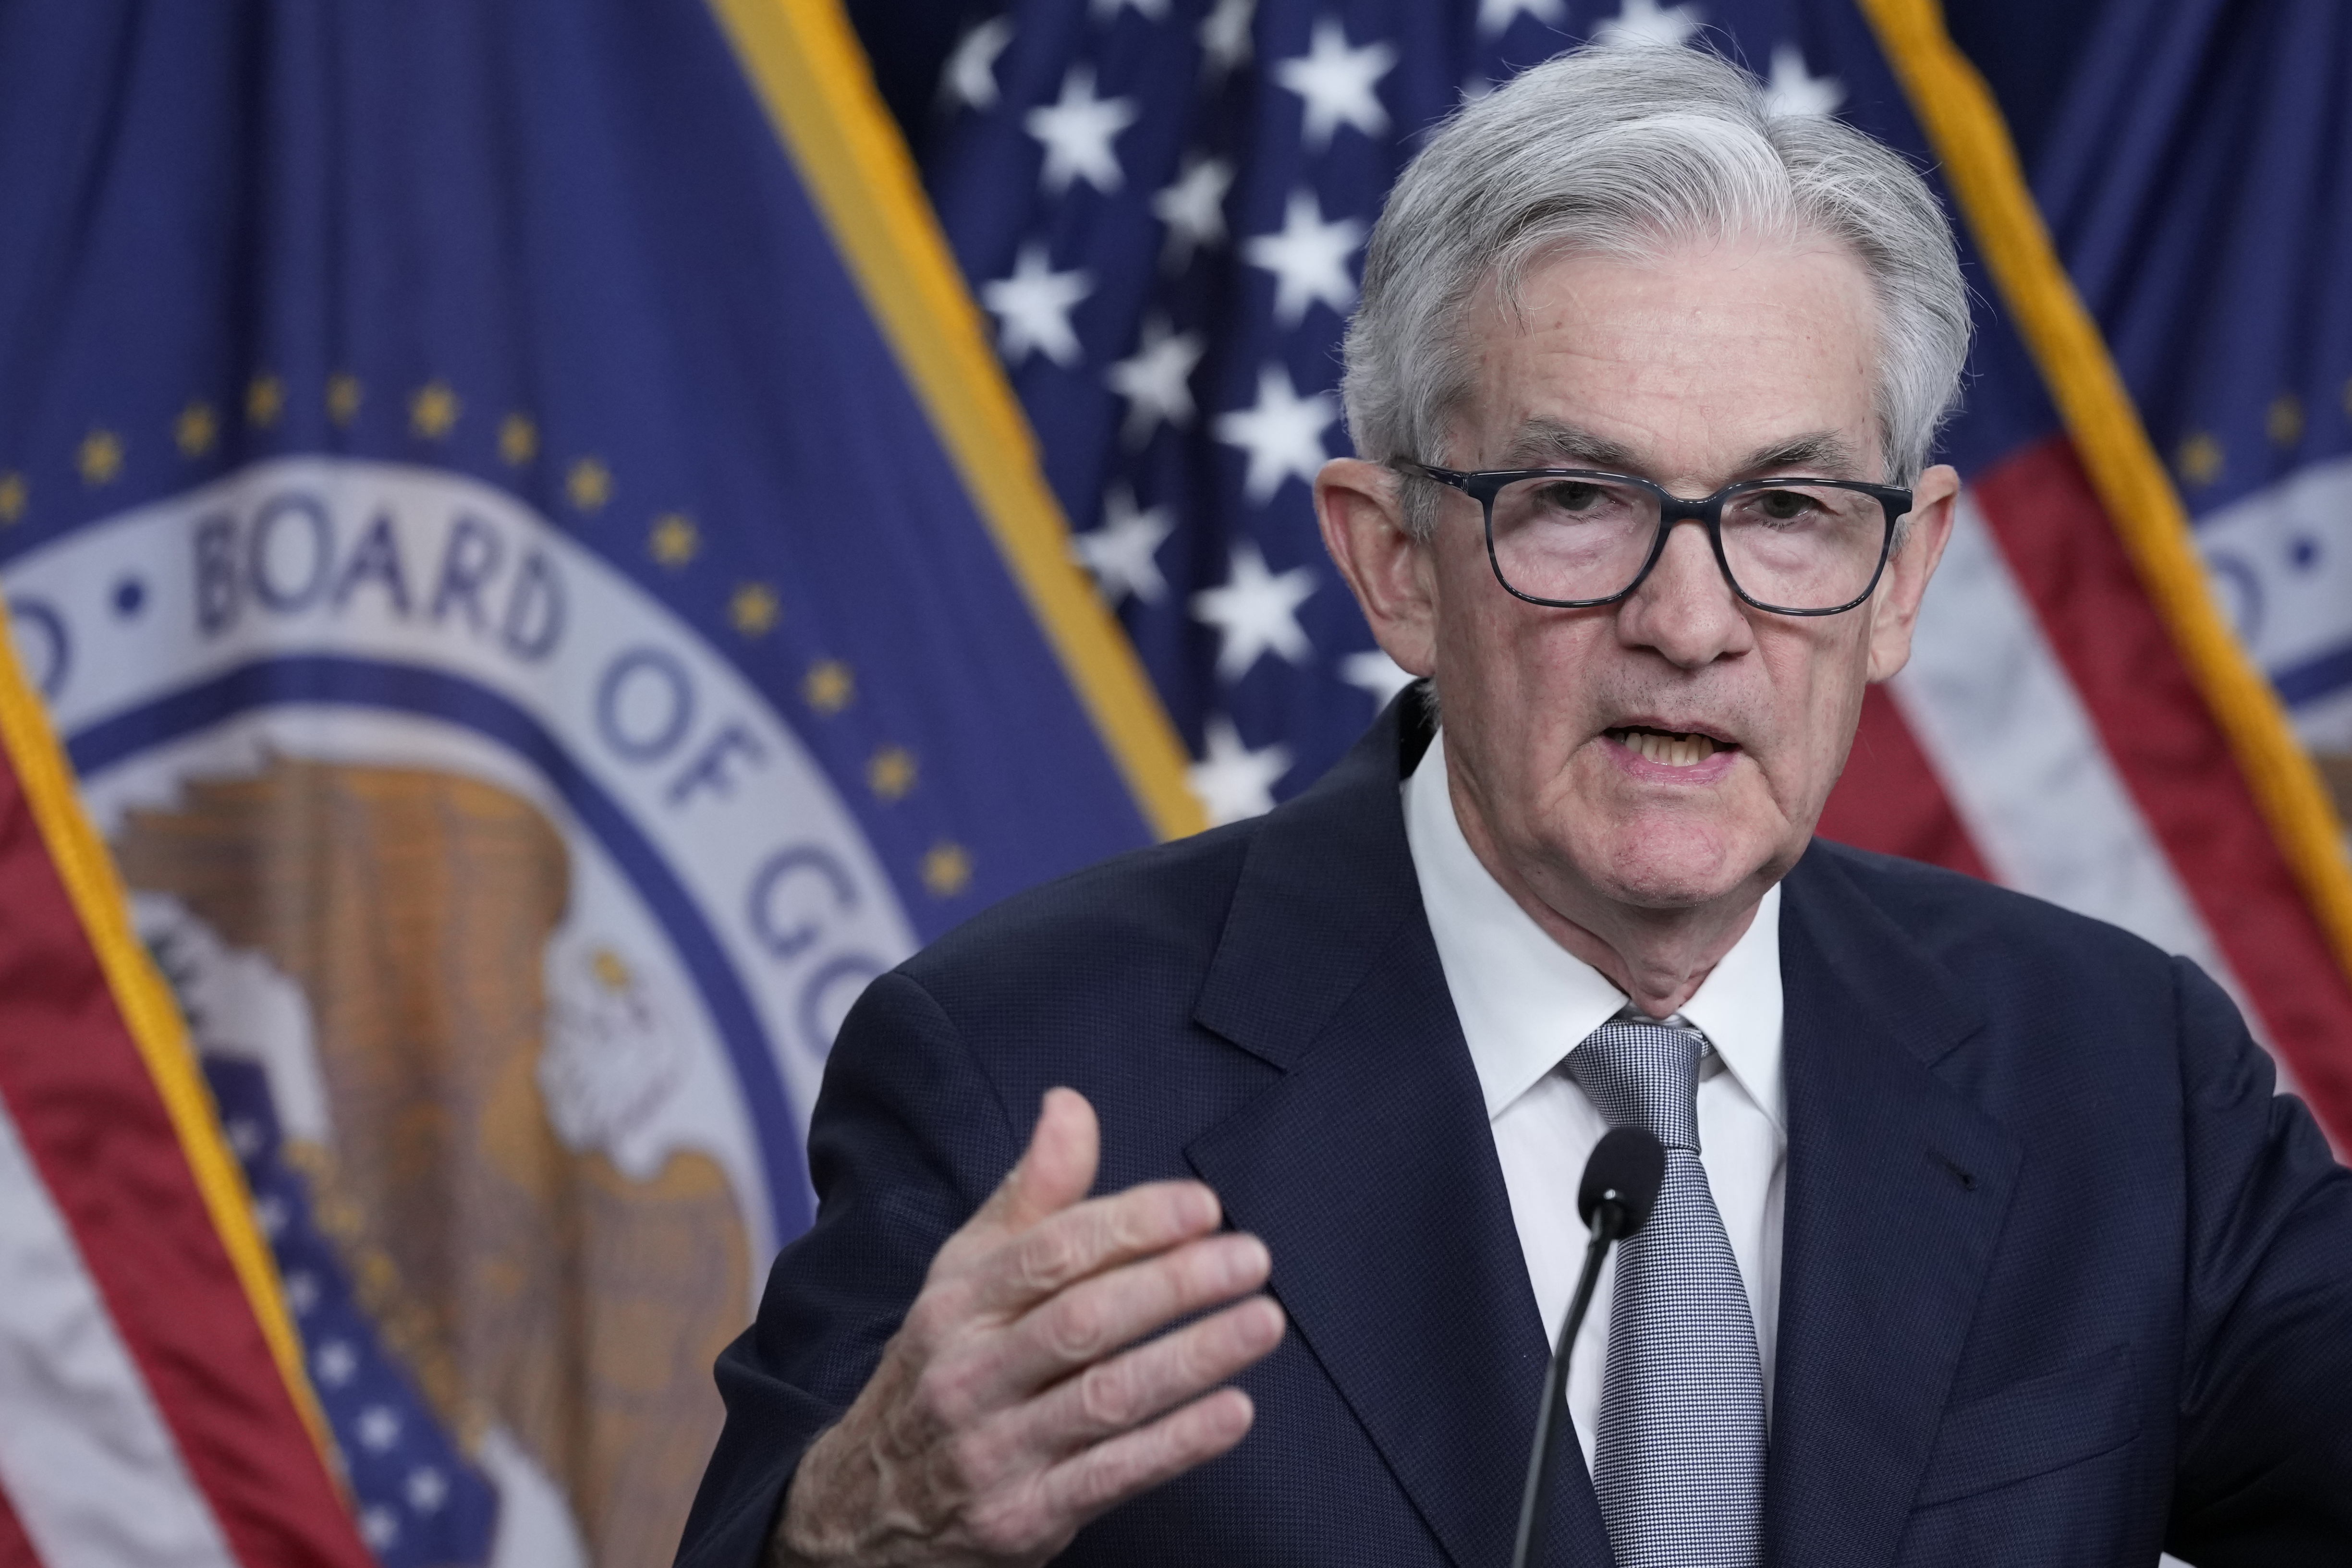 Federal Reserve Meeting: Fed Leaves Rates Unchanged, for Now - The